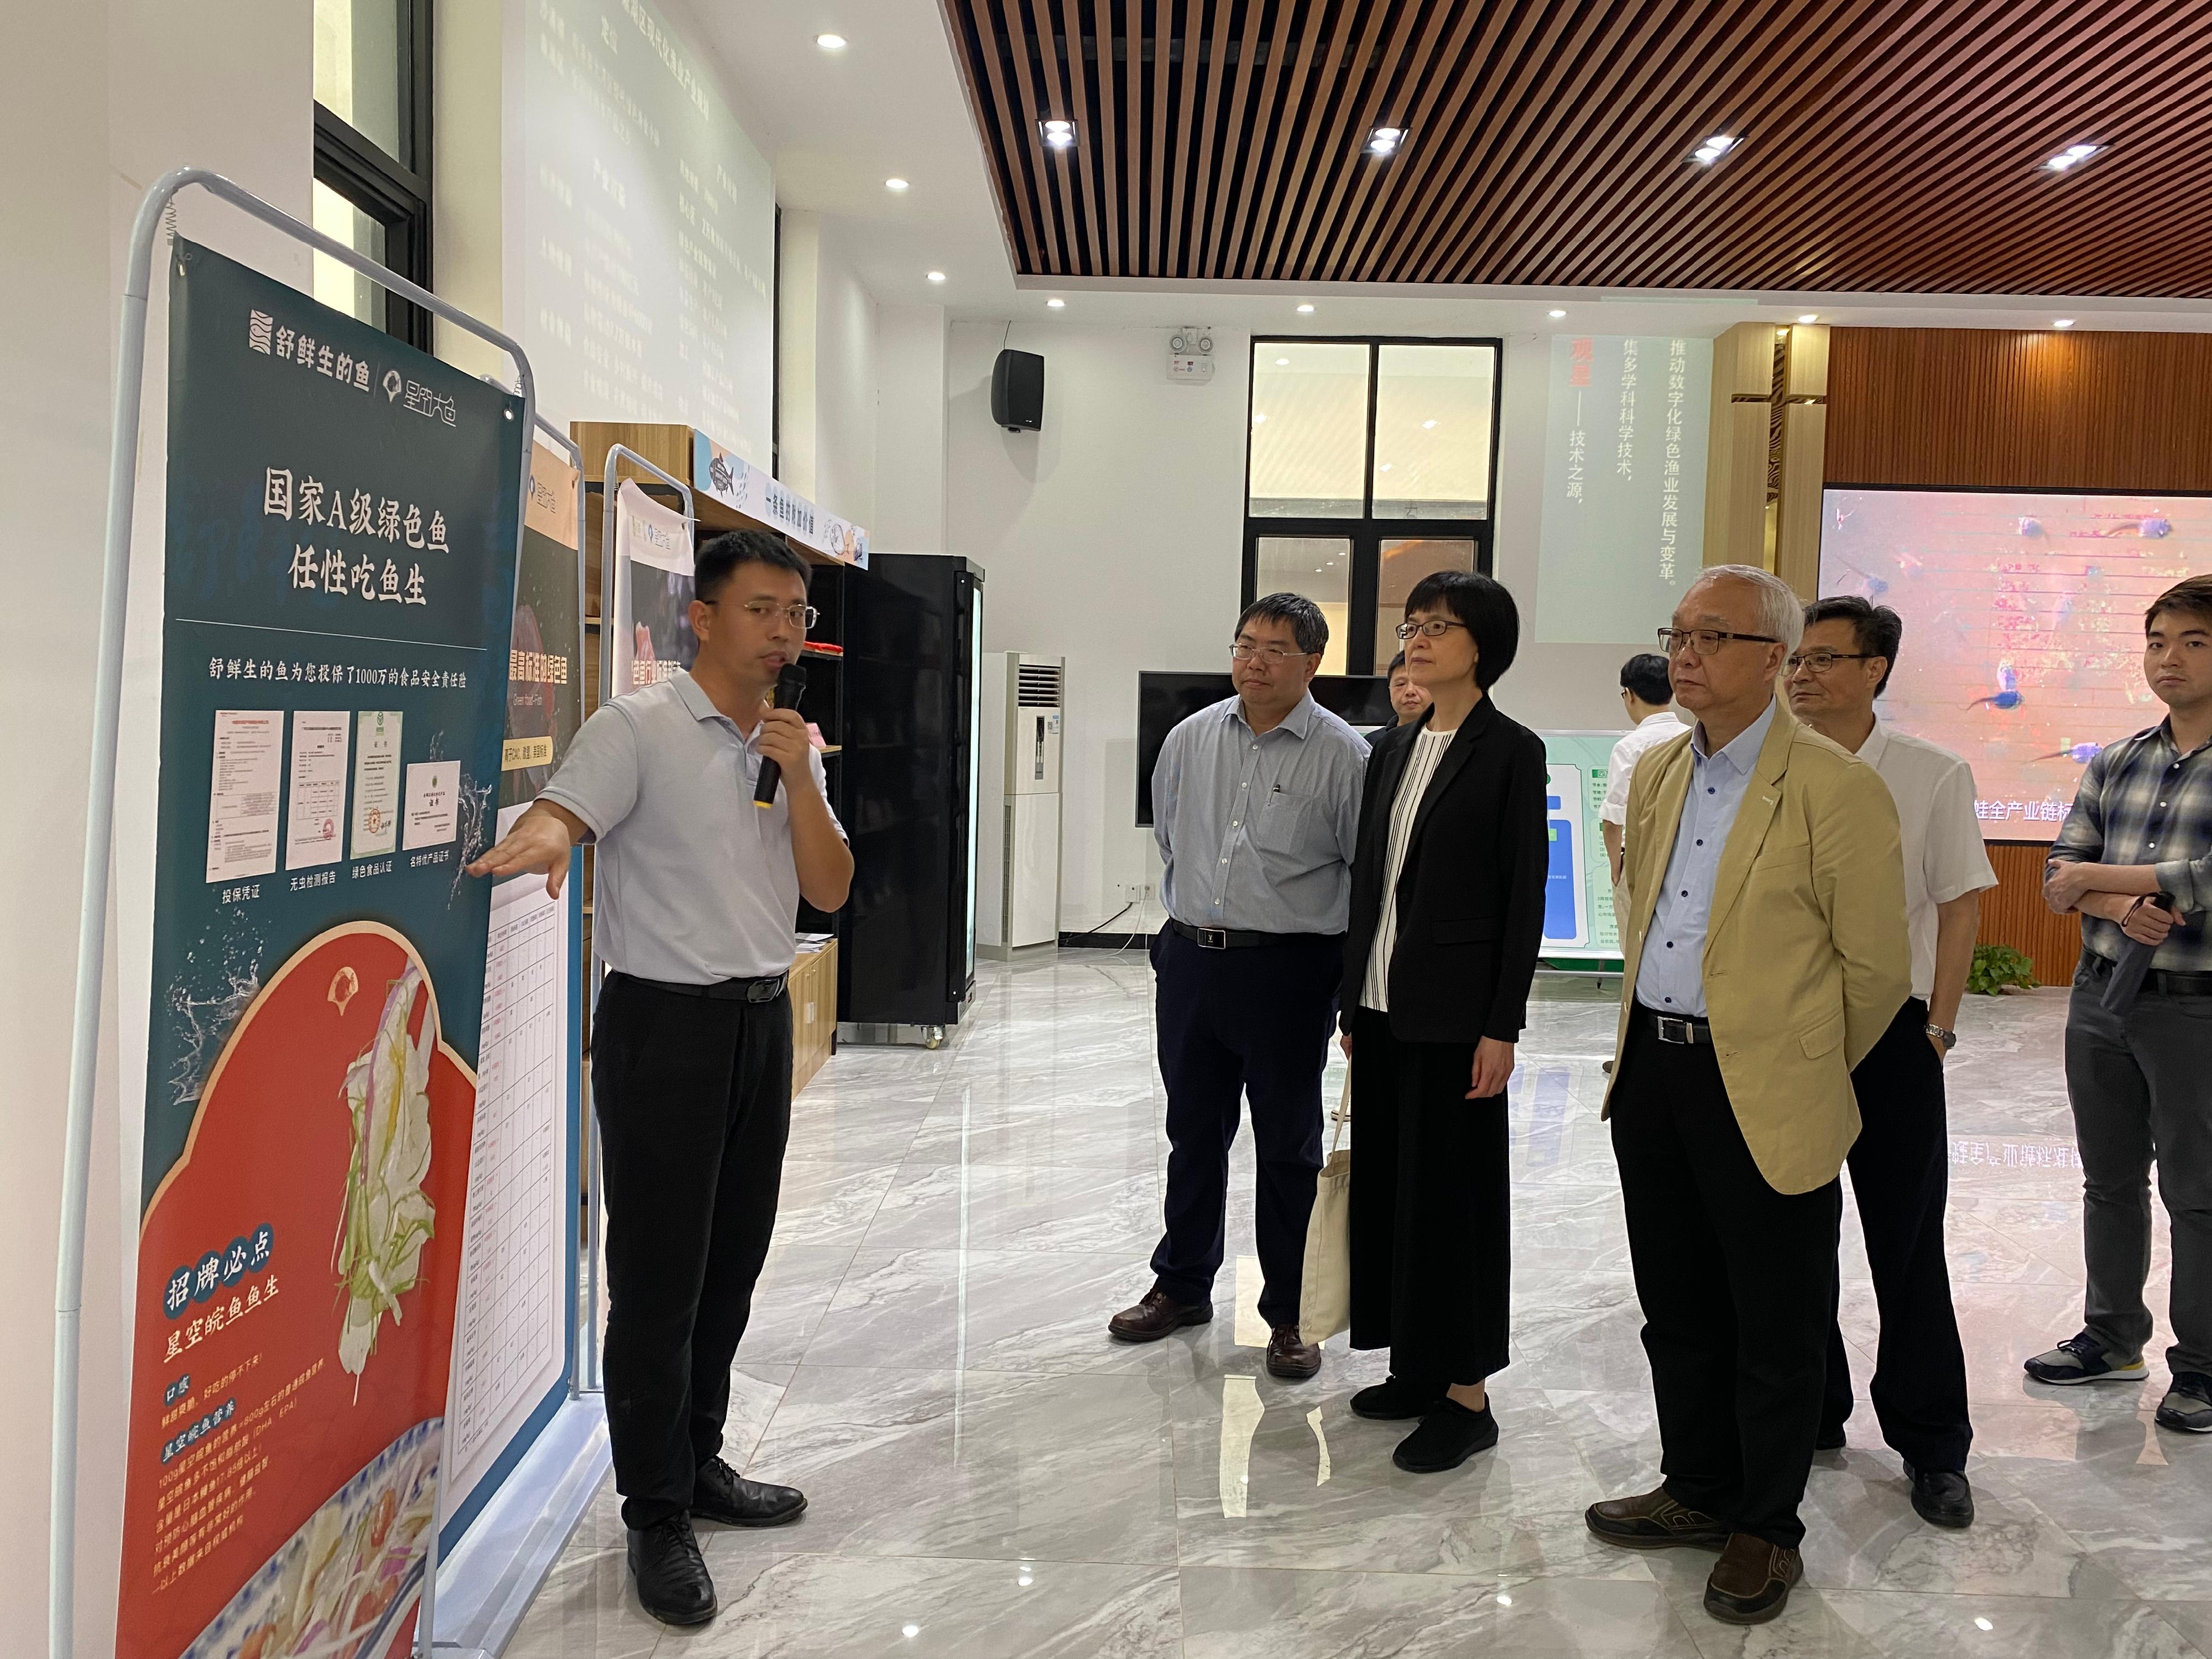 The Secretary for Environment and Ecology, Mr Tse Chin-wan, began his visit in Guangzhou and Zhaoqing today (July 18) and visited the aquaculture farm of Guanxing (Zhaoqing) Agricultural Technology Co. Ltd in the afternoon. Photo shows Mr Tse (fourth left); the Permanent Secretary for Environment and Ecology (Food), Miss Vivian Lau (third left); and the Director of Agriculture, Fisheries and Conservation, Dr Leung Siu-fai (second left), receiving a briefing from a representative of the farm on the latest developments in aquaponic container farming.